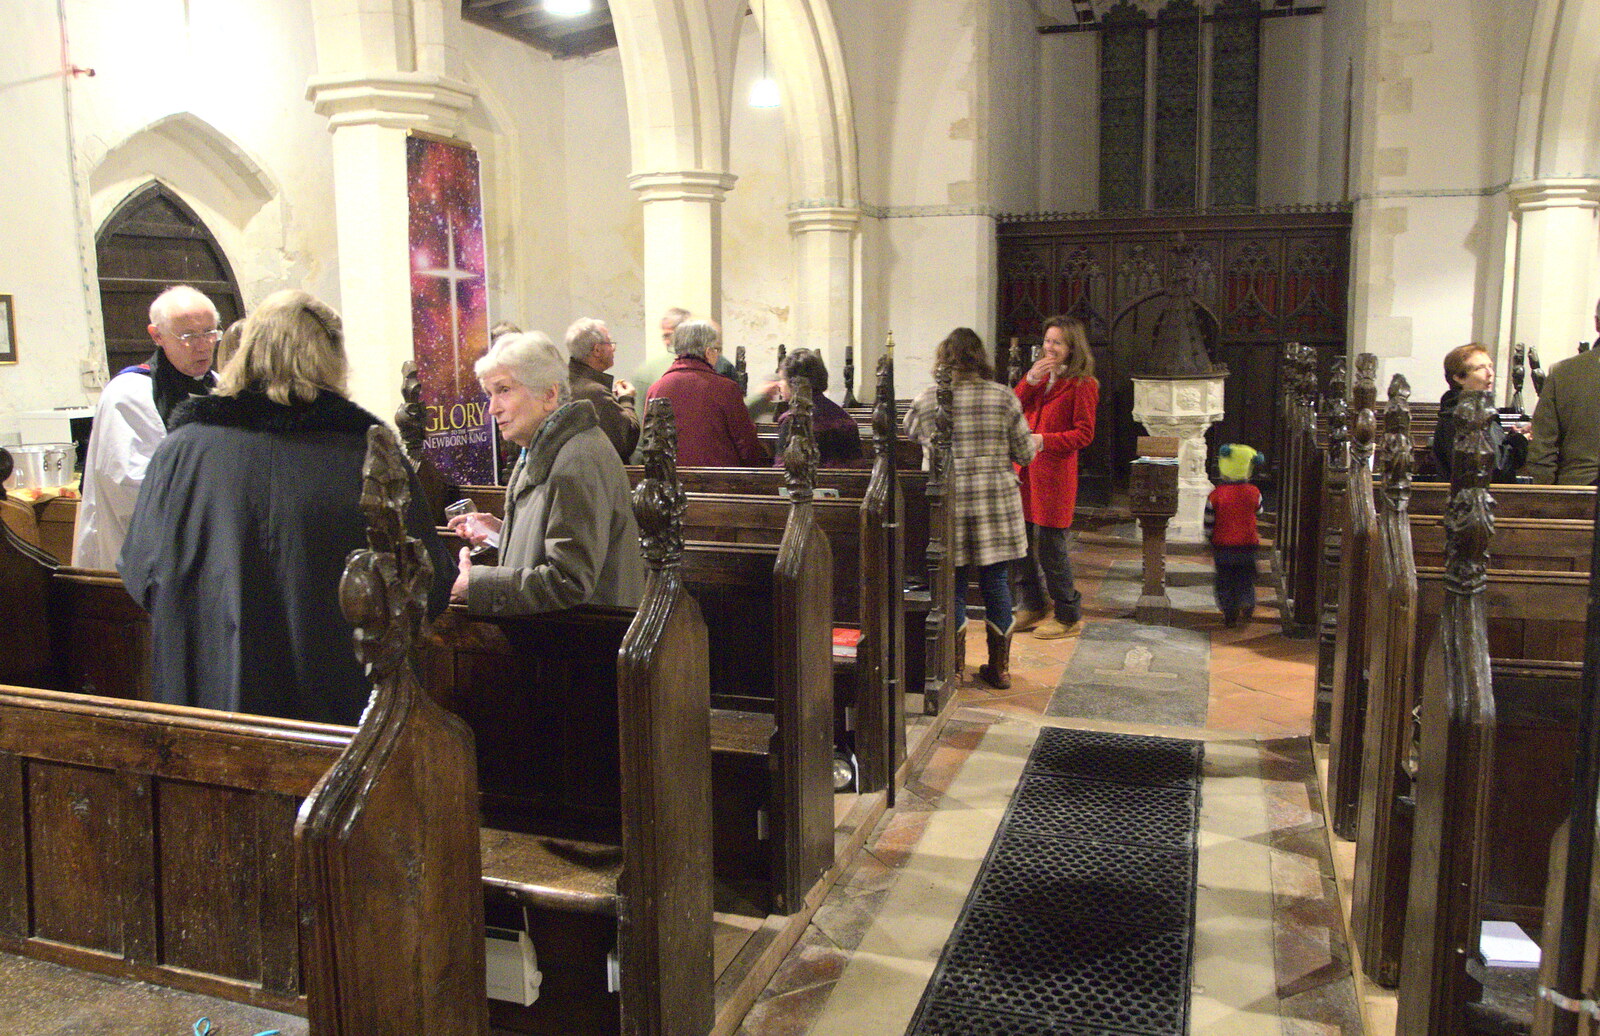 Crowds mingle after the gig from The Thrandeston Carol Gig, St. Margaret of Antioch, Thrandeston, Suffolk - 18th December 2012